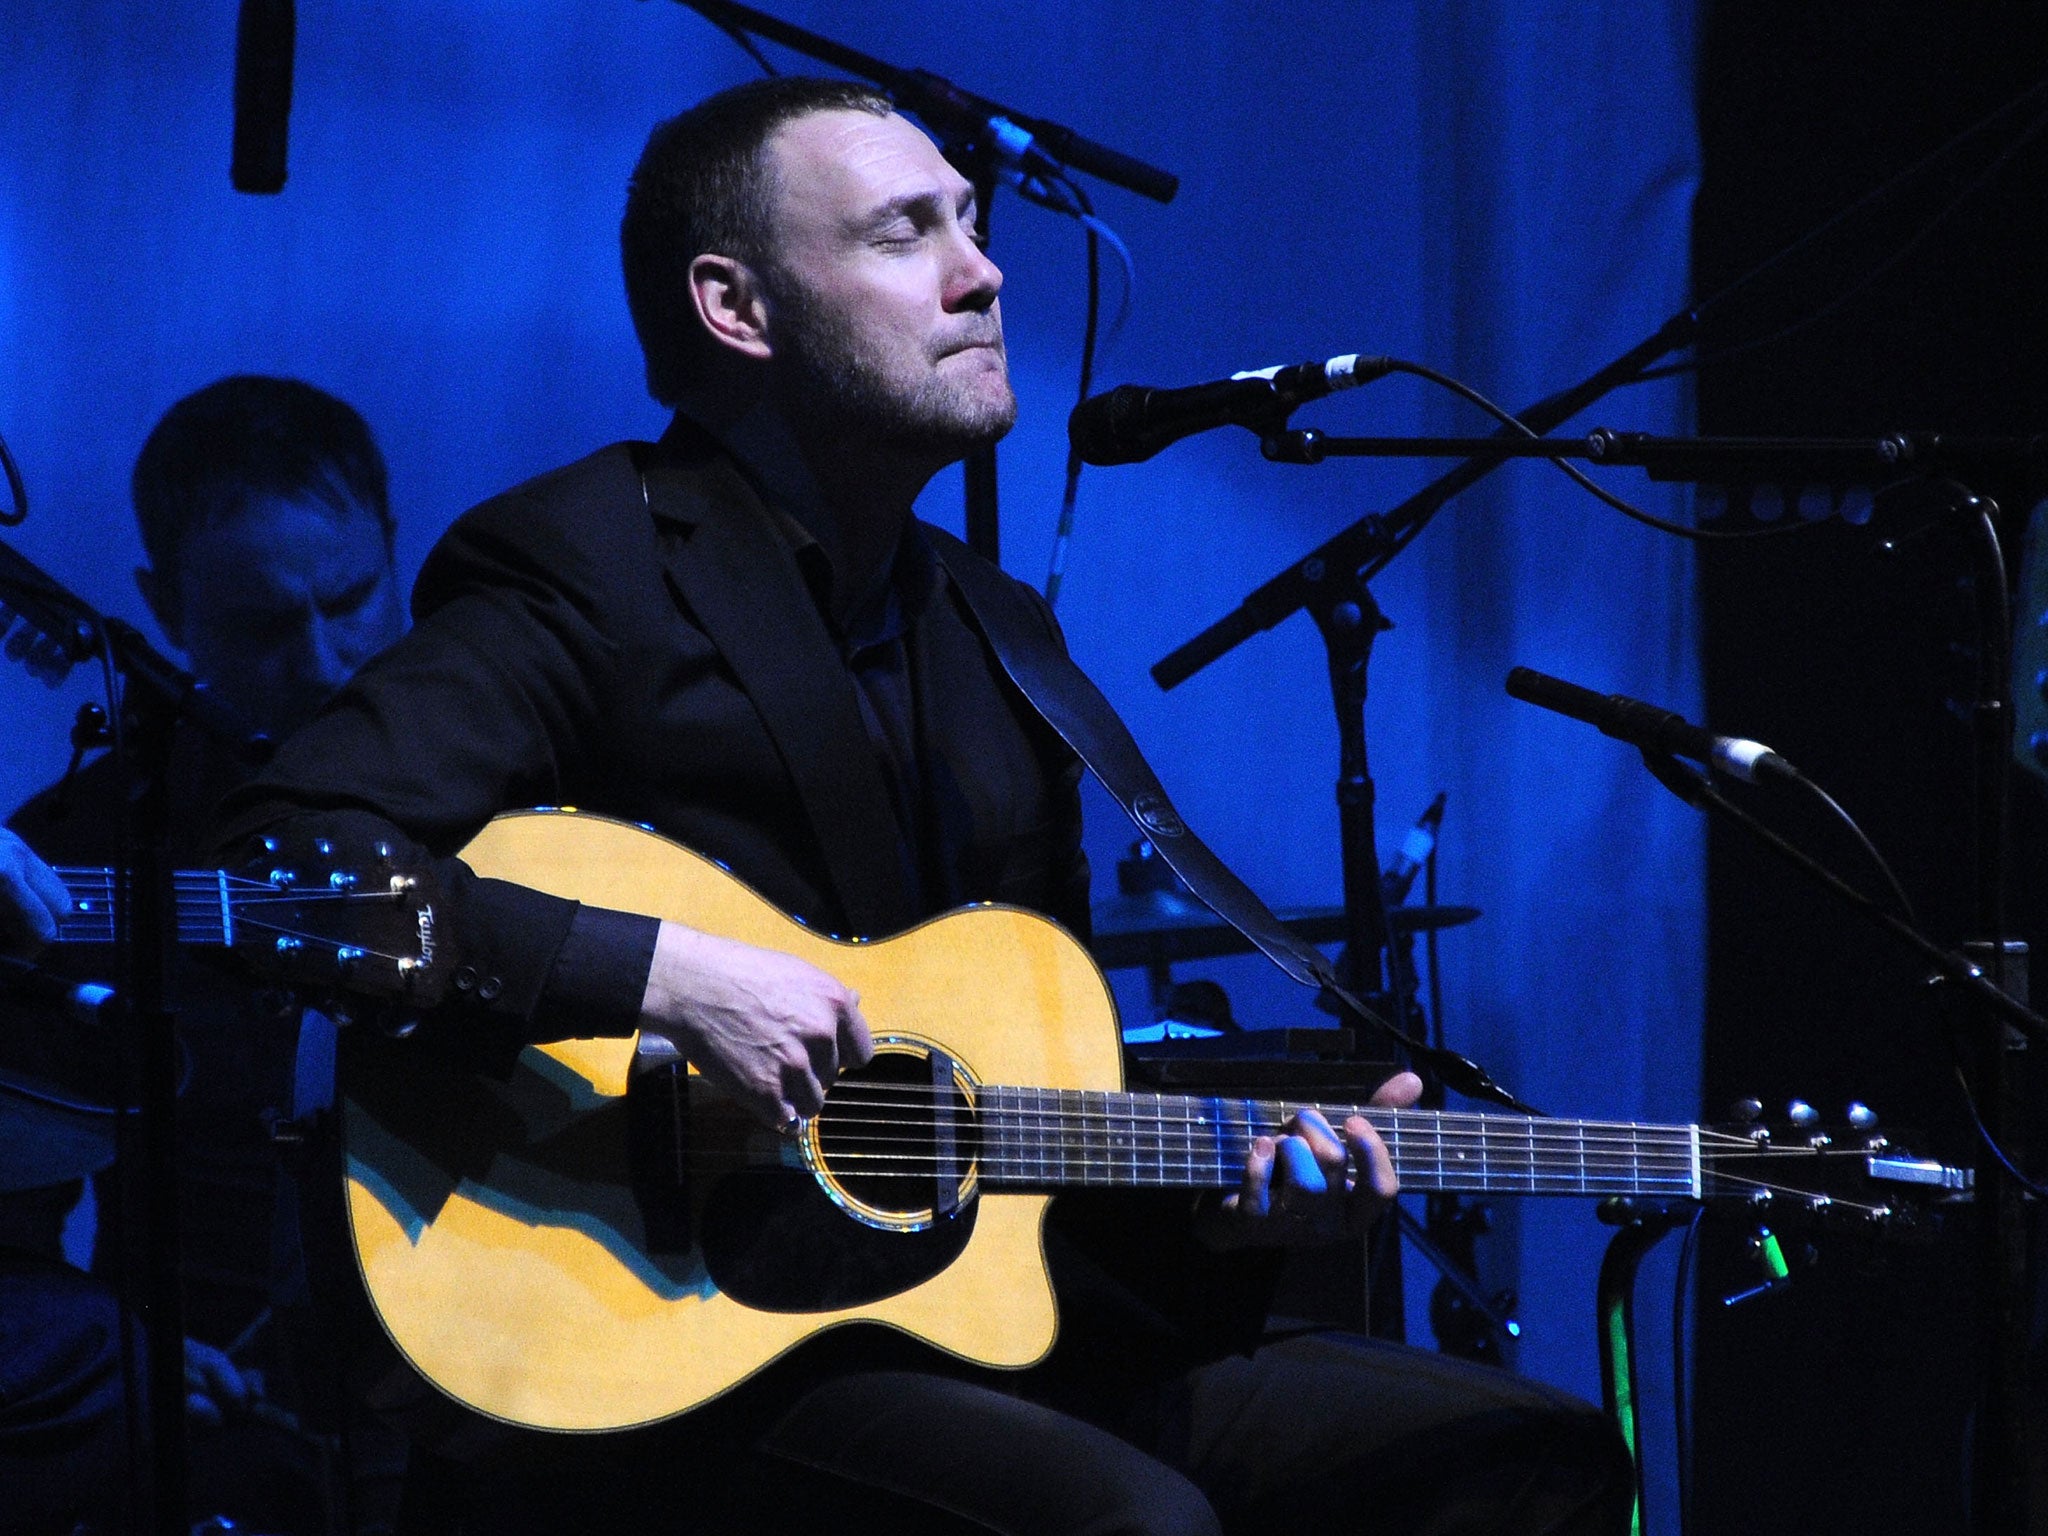 David Gray performs at The Beacon Theatre on 23 February, 2011, in New York City